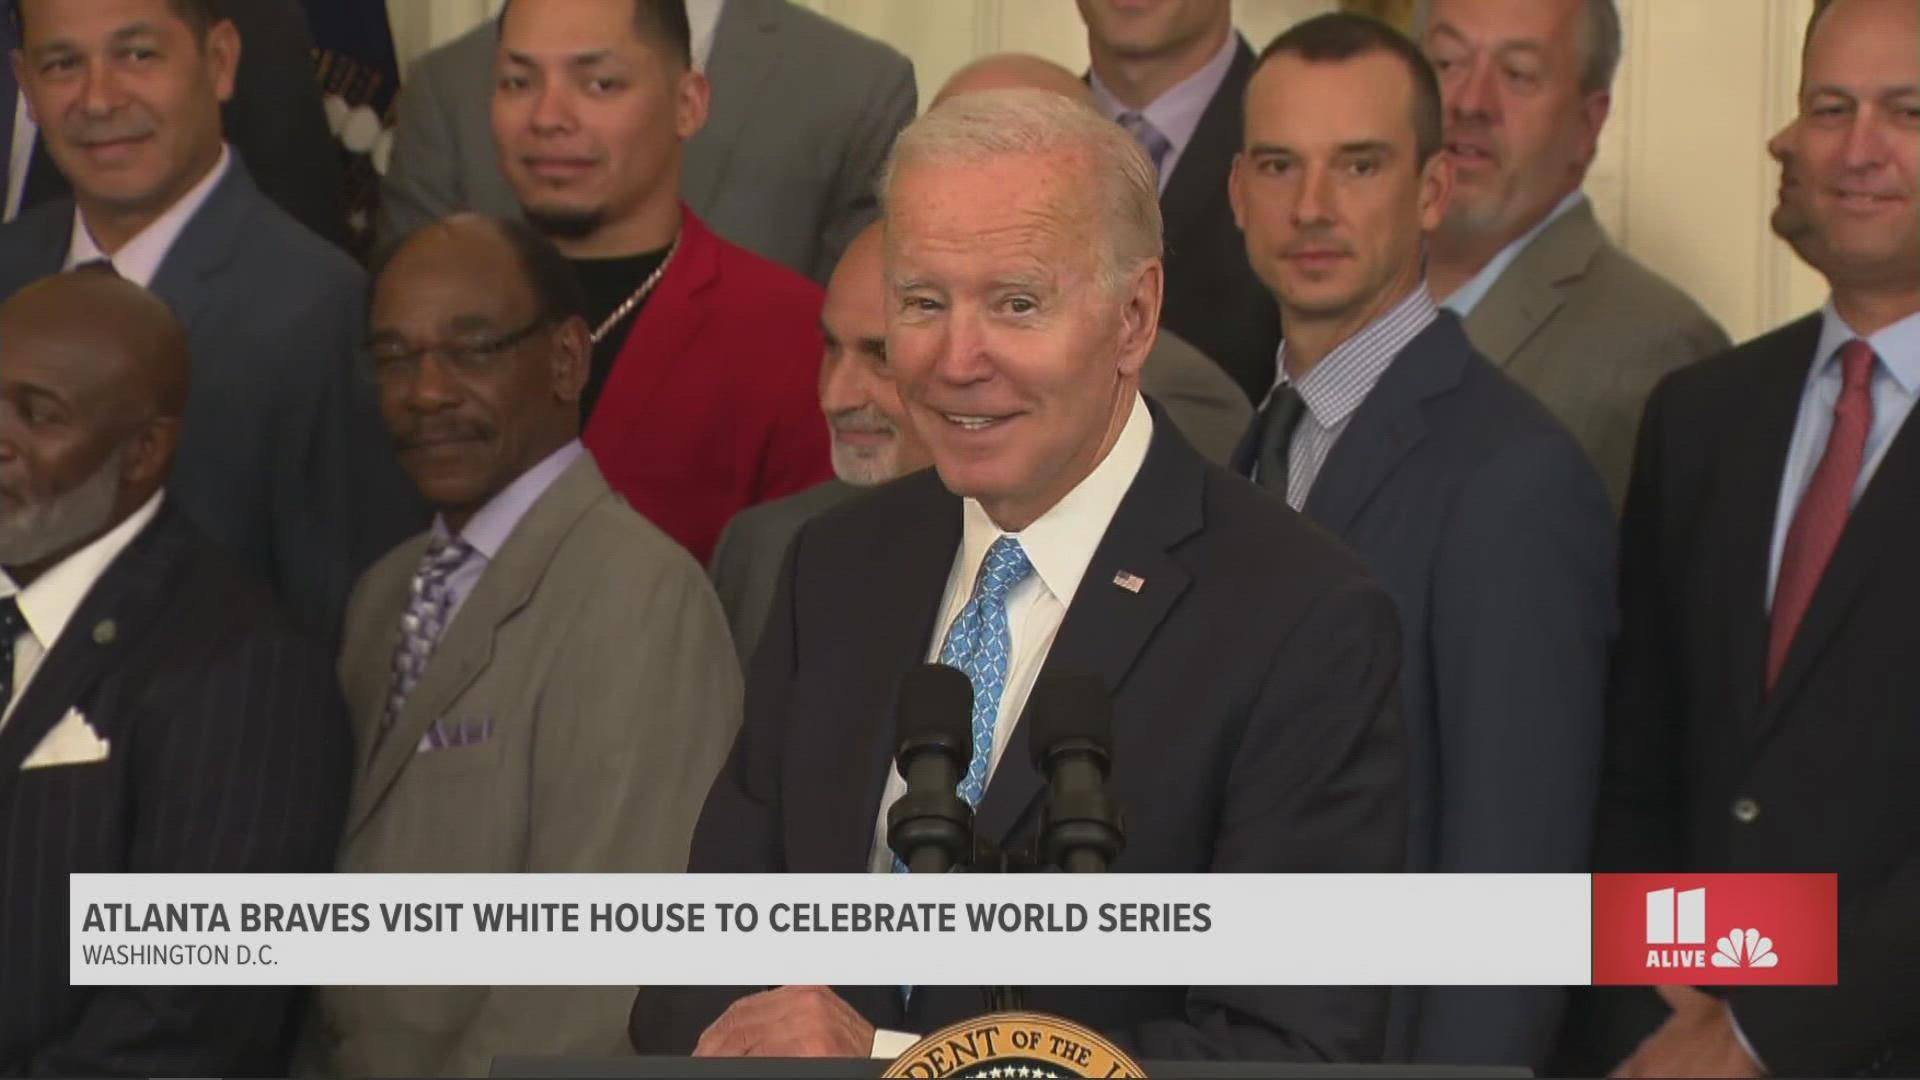 He addressed the team during a celebration event at the White House on Monday.